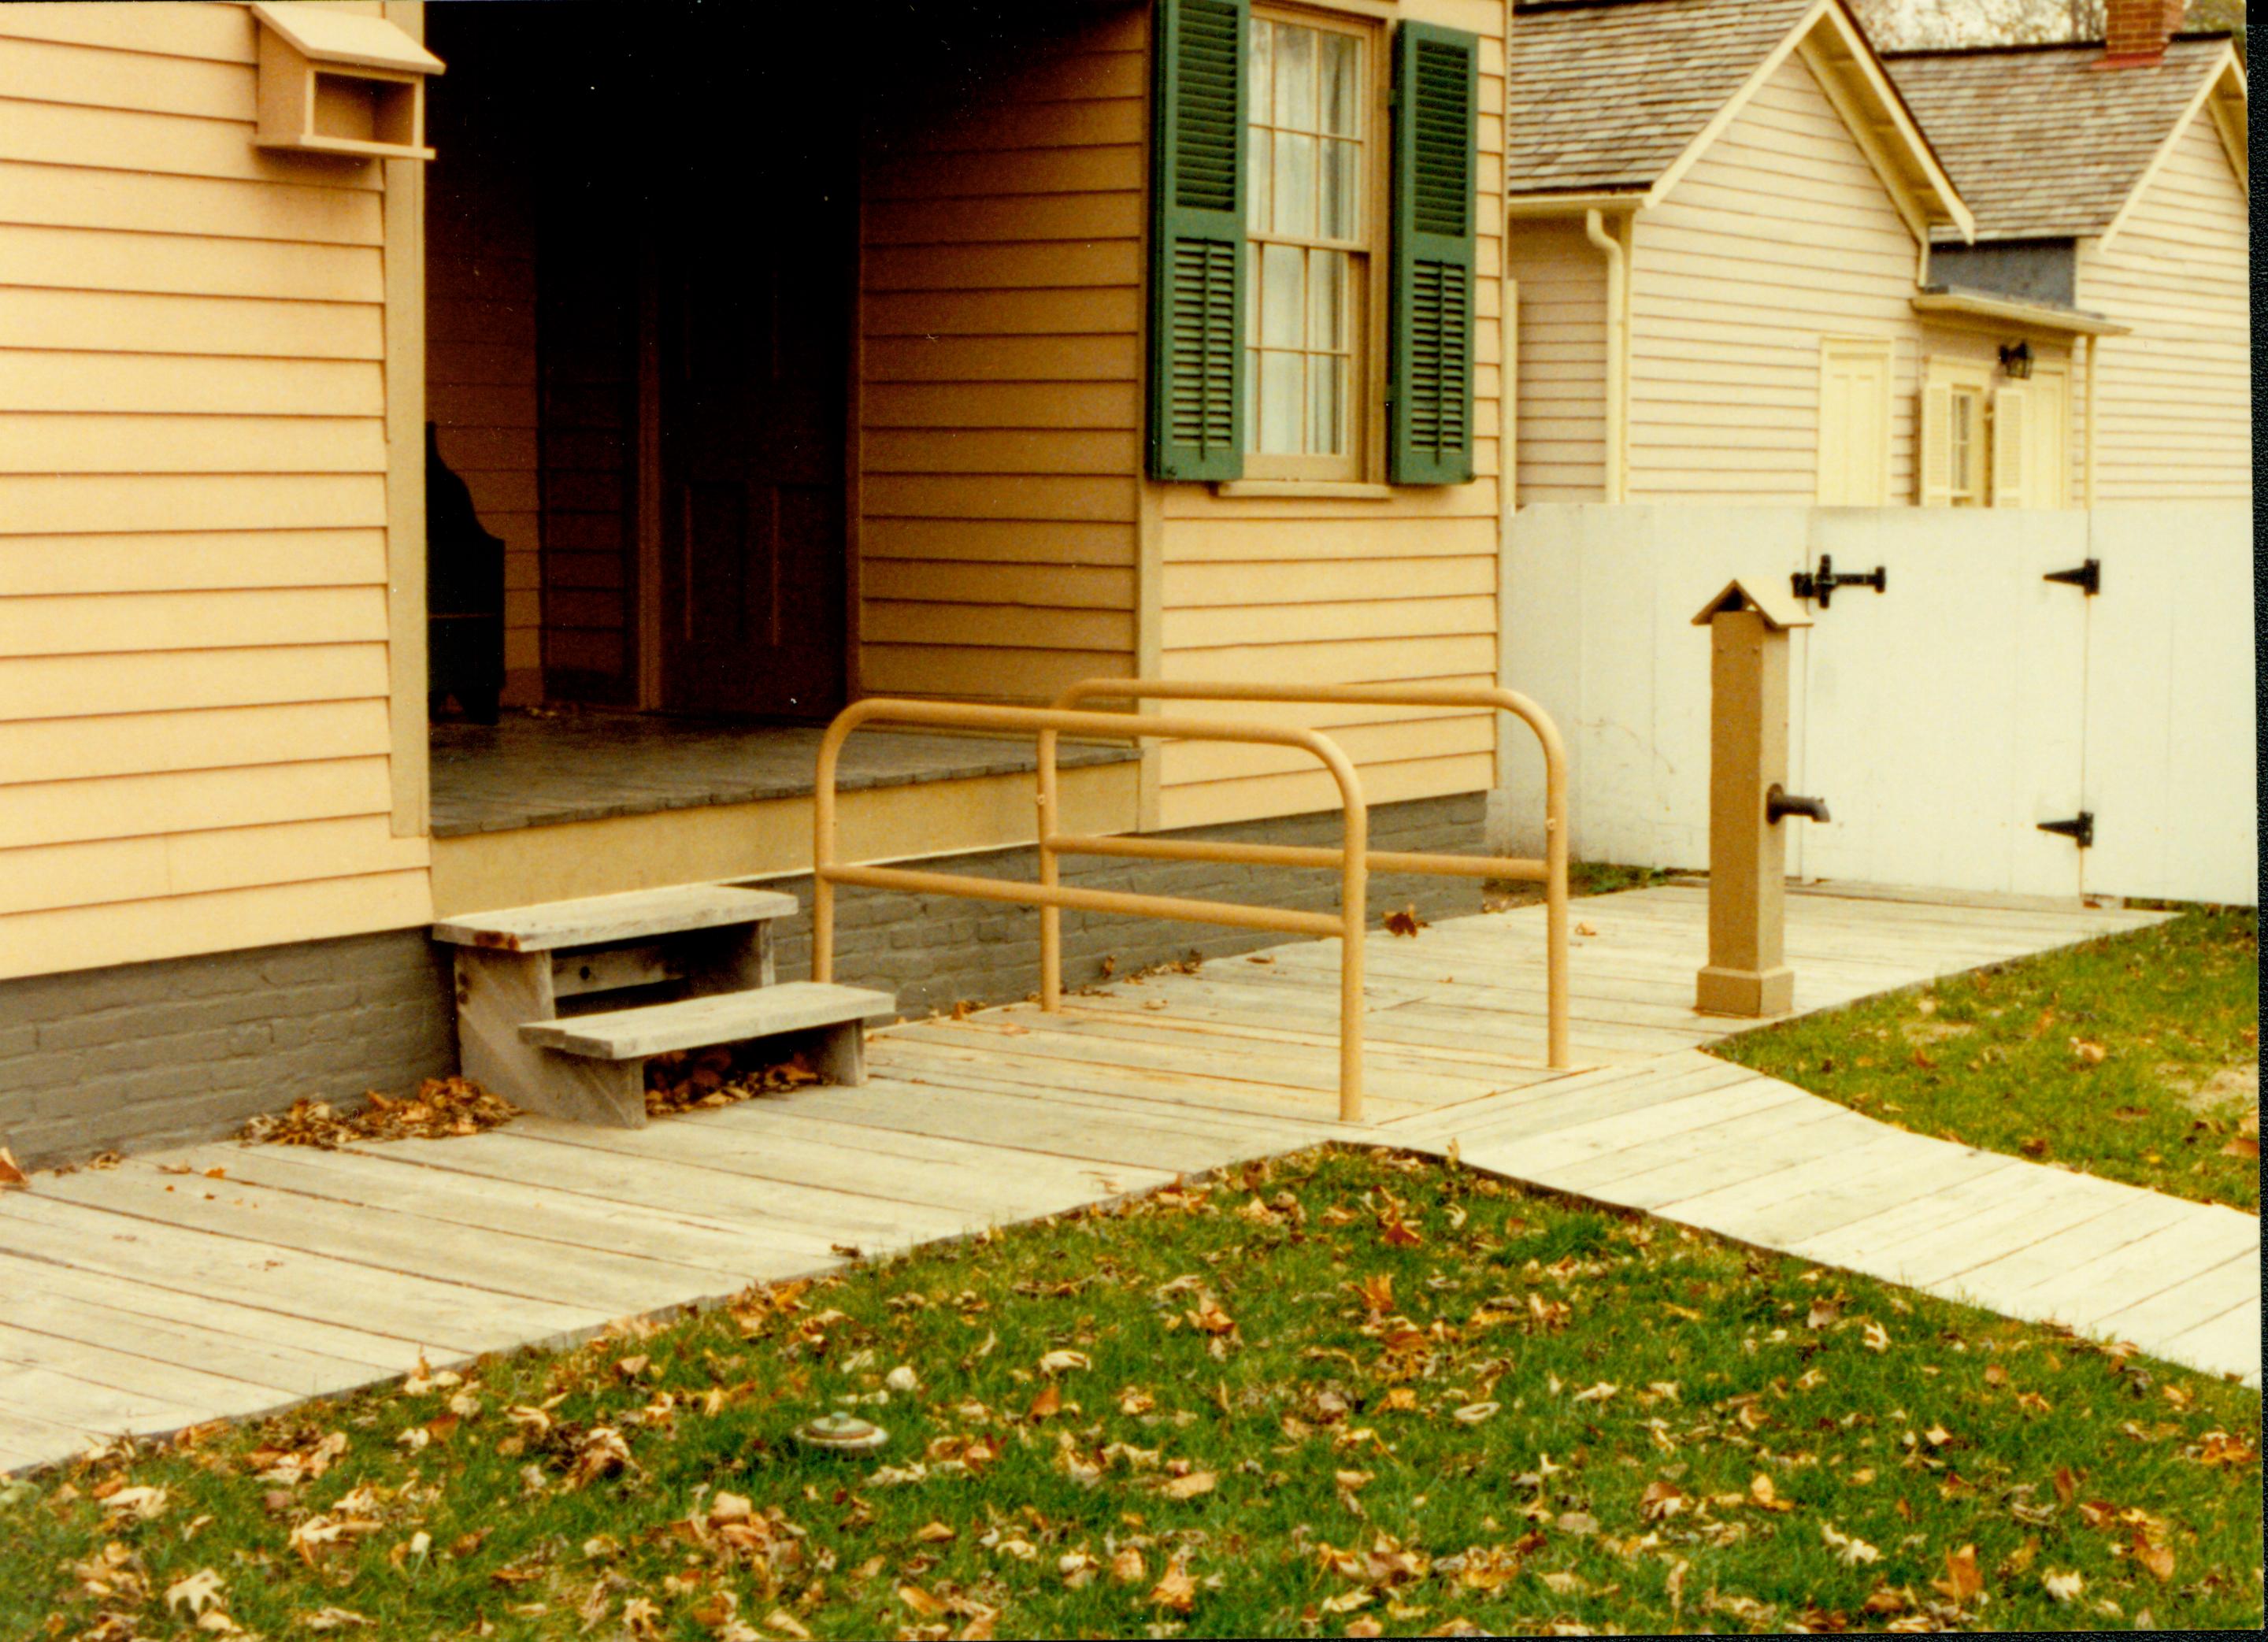 Lincoln Home wheelchair lift, fully retracted. Corneau house in background. Photographer facing north west.